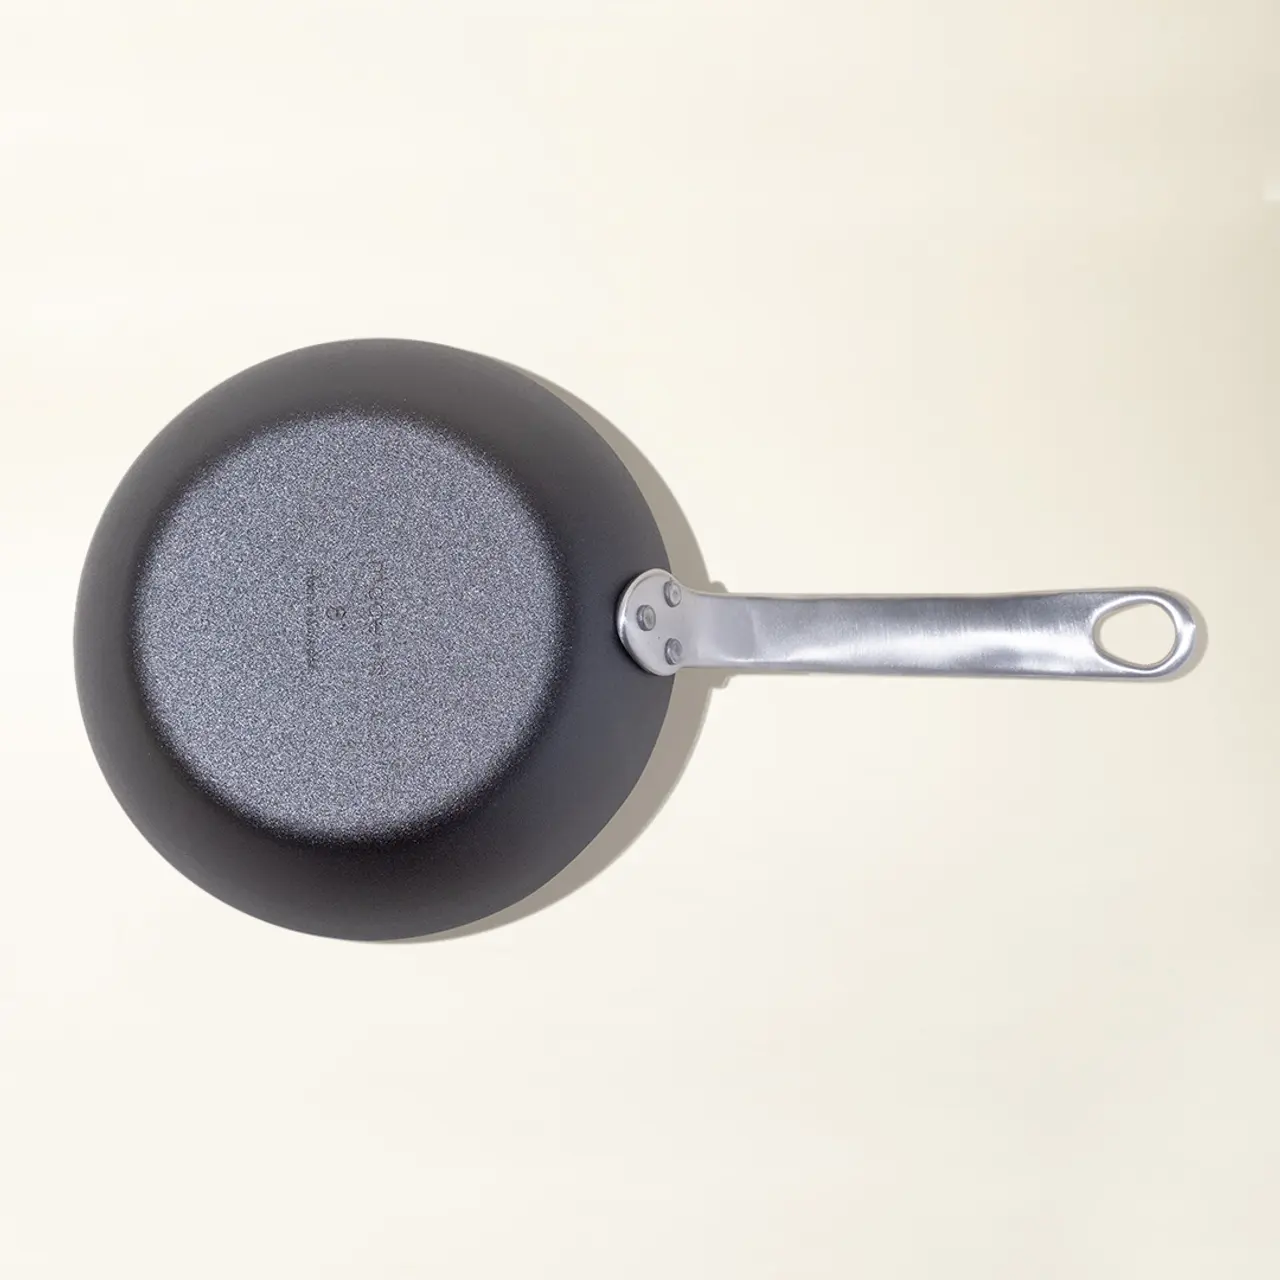 A non-stick frying pan with a silver handle is shown from above on a light background.